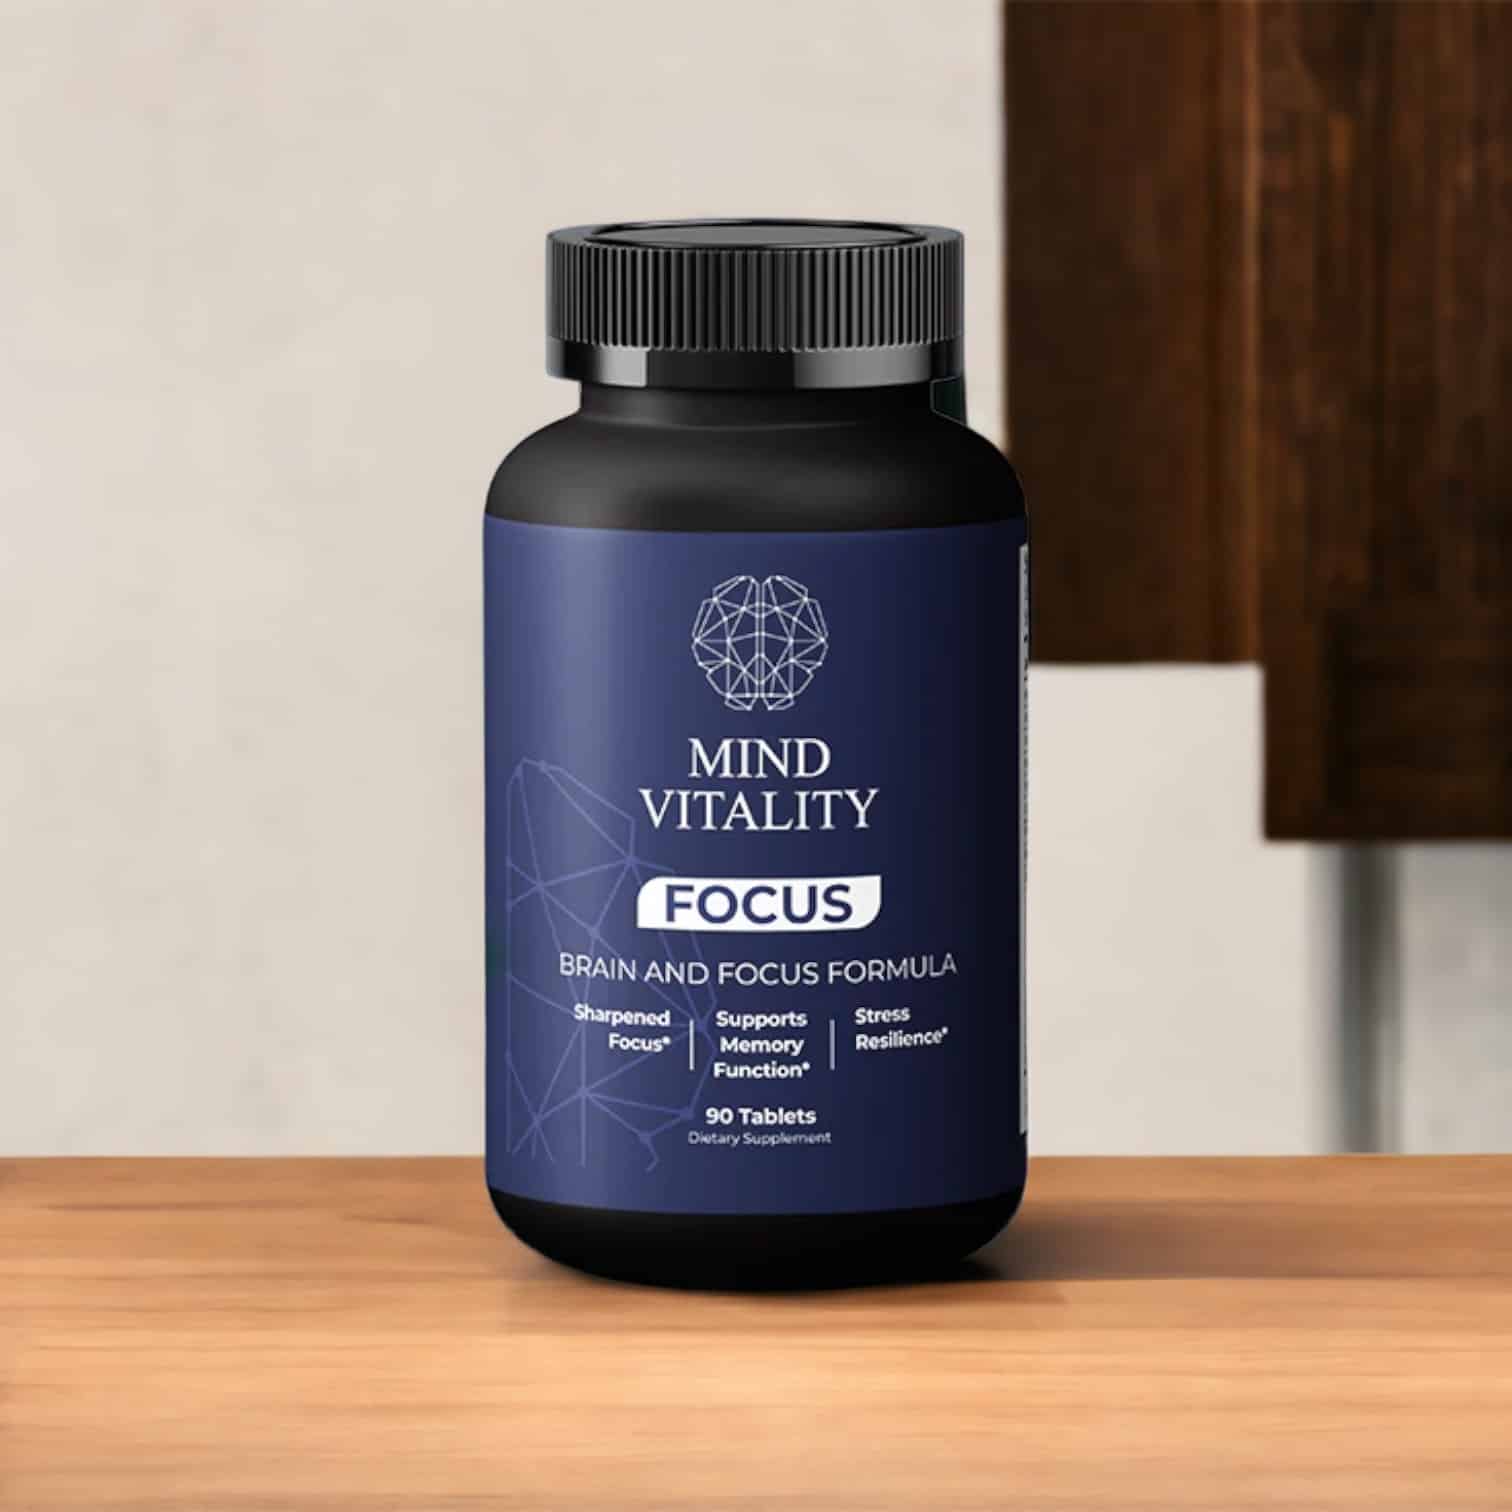 Mind Vitality Nootropic Review